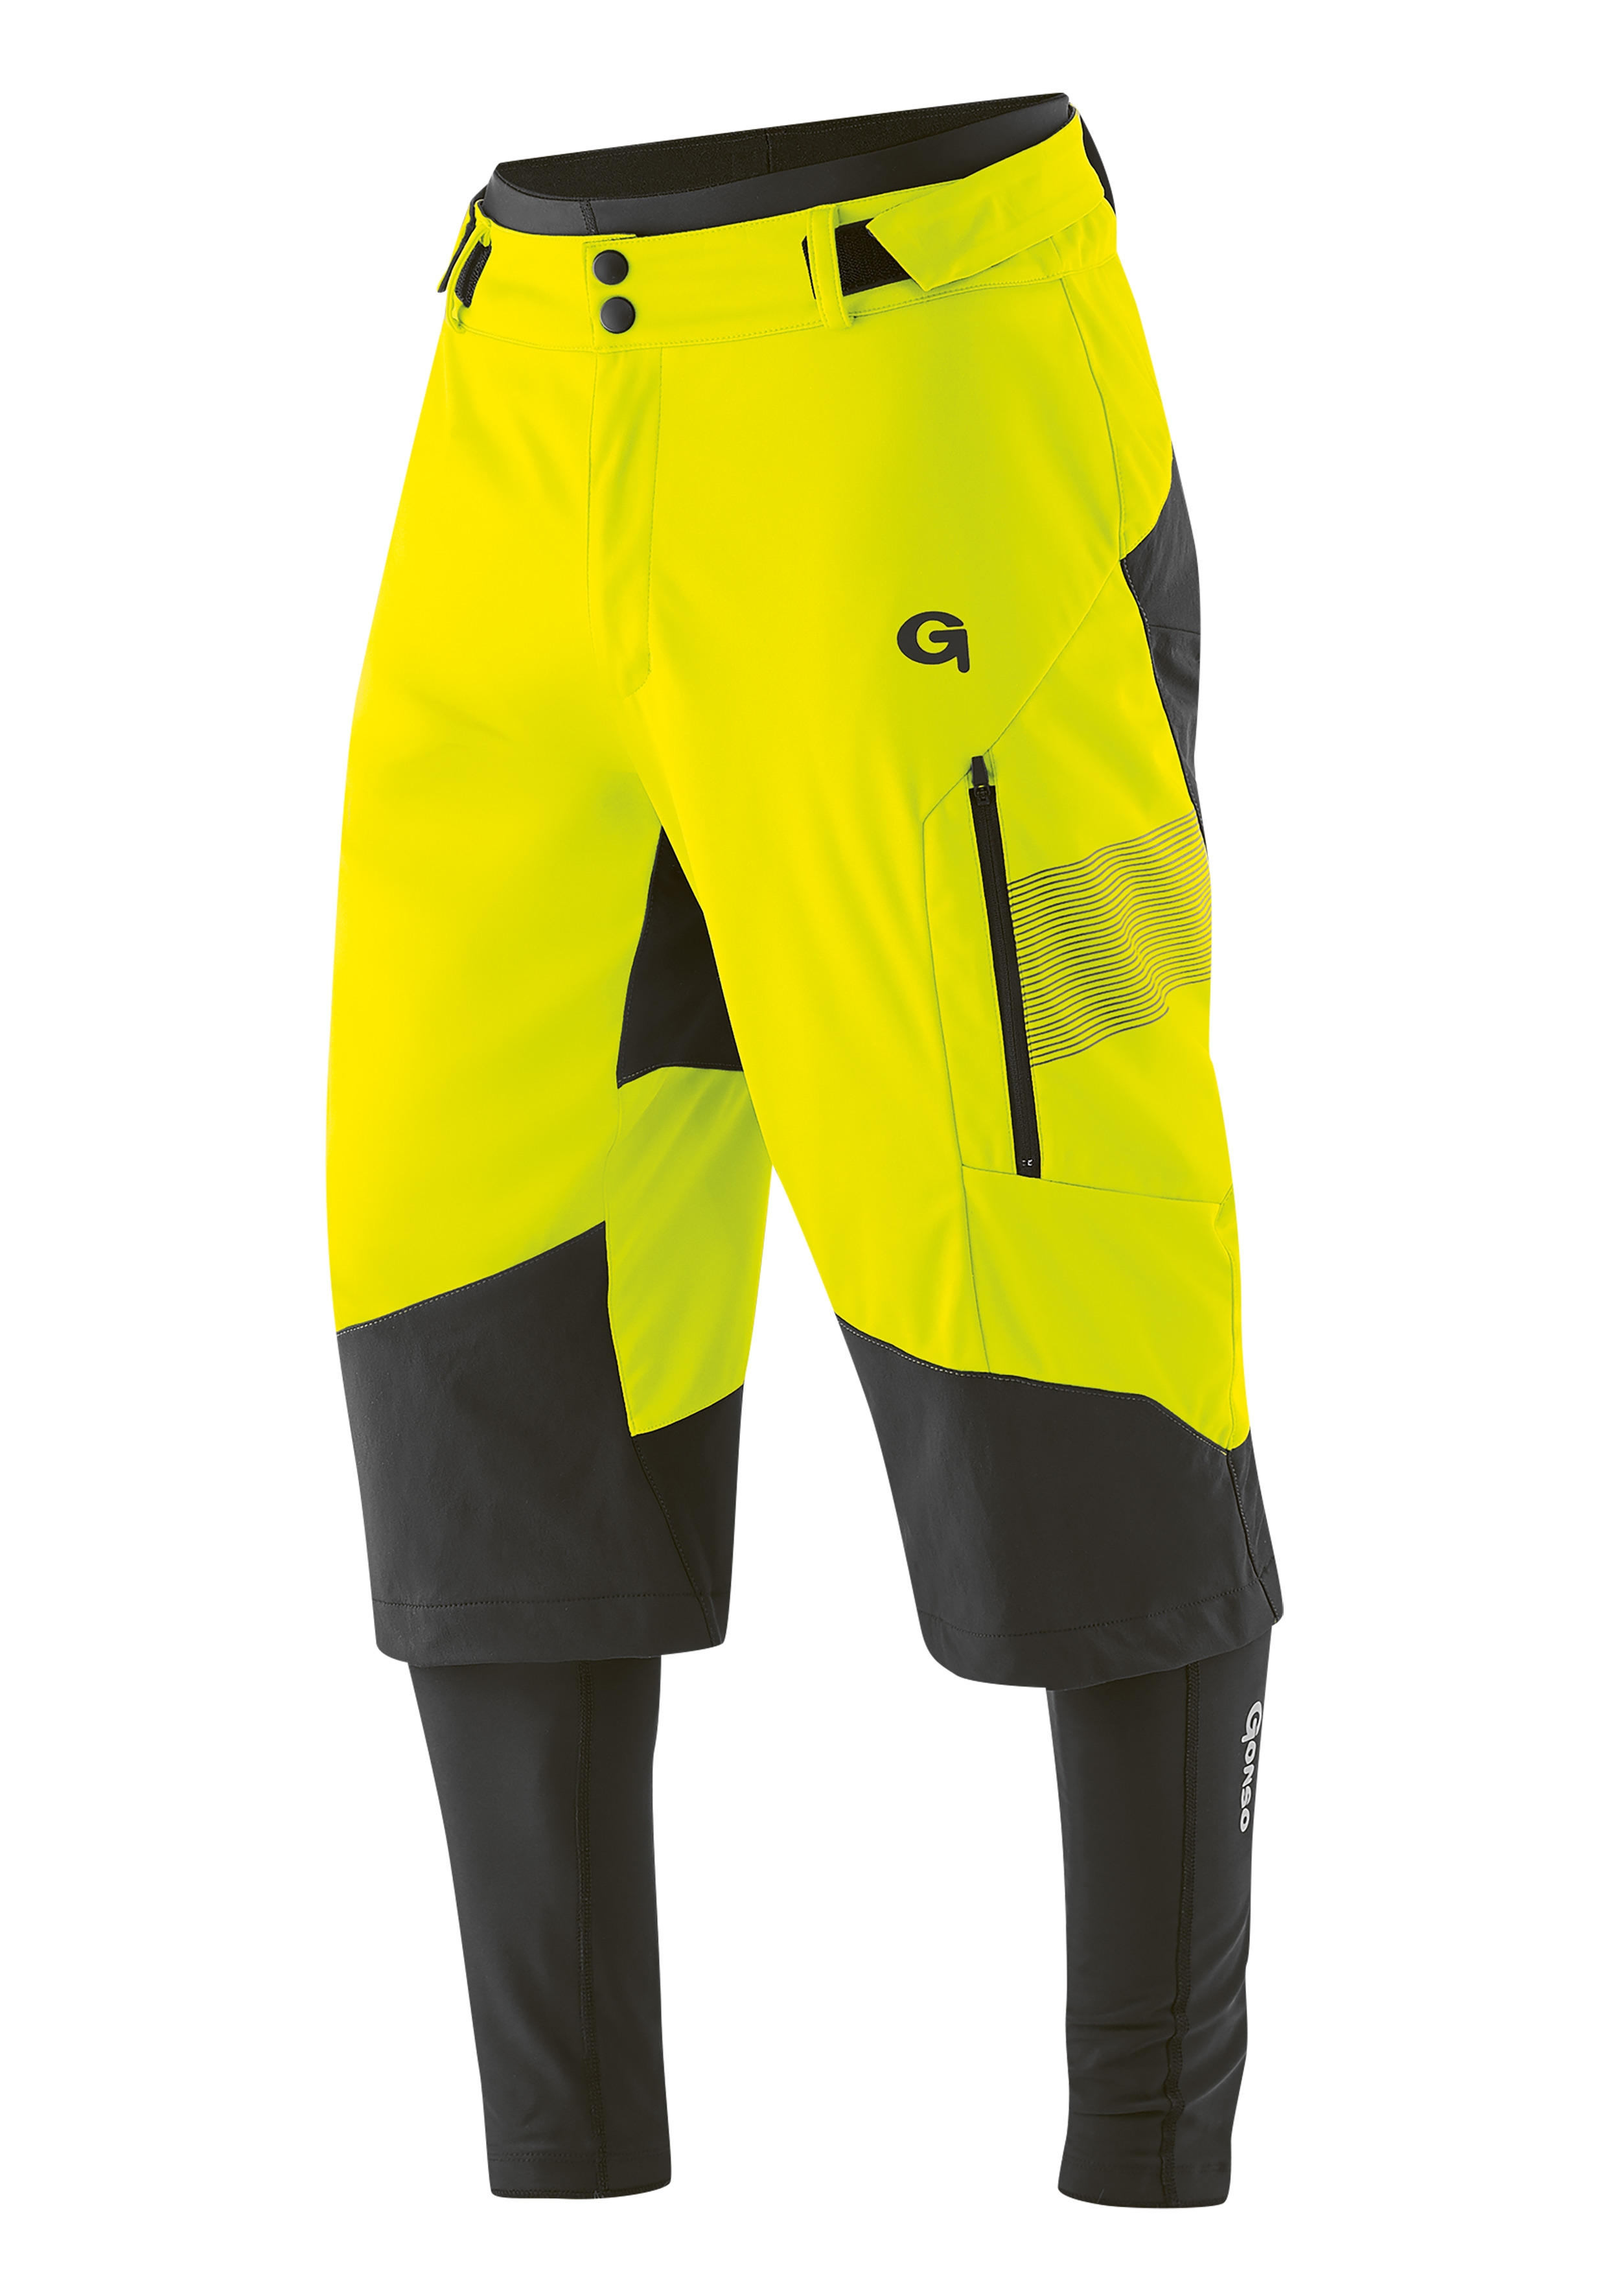 Gonso yellow 3-in-1 Action Softshell Sports Sirac Hose safety #Varinfo|